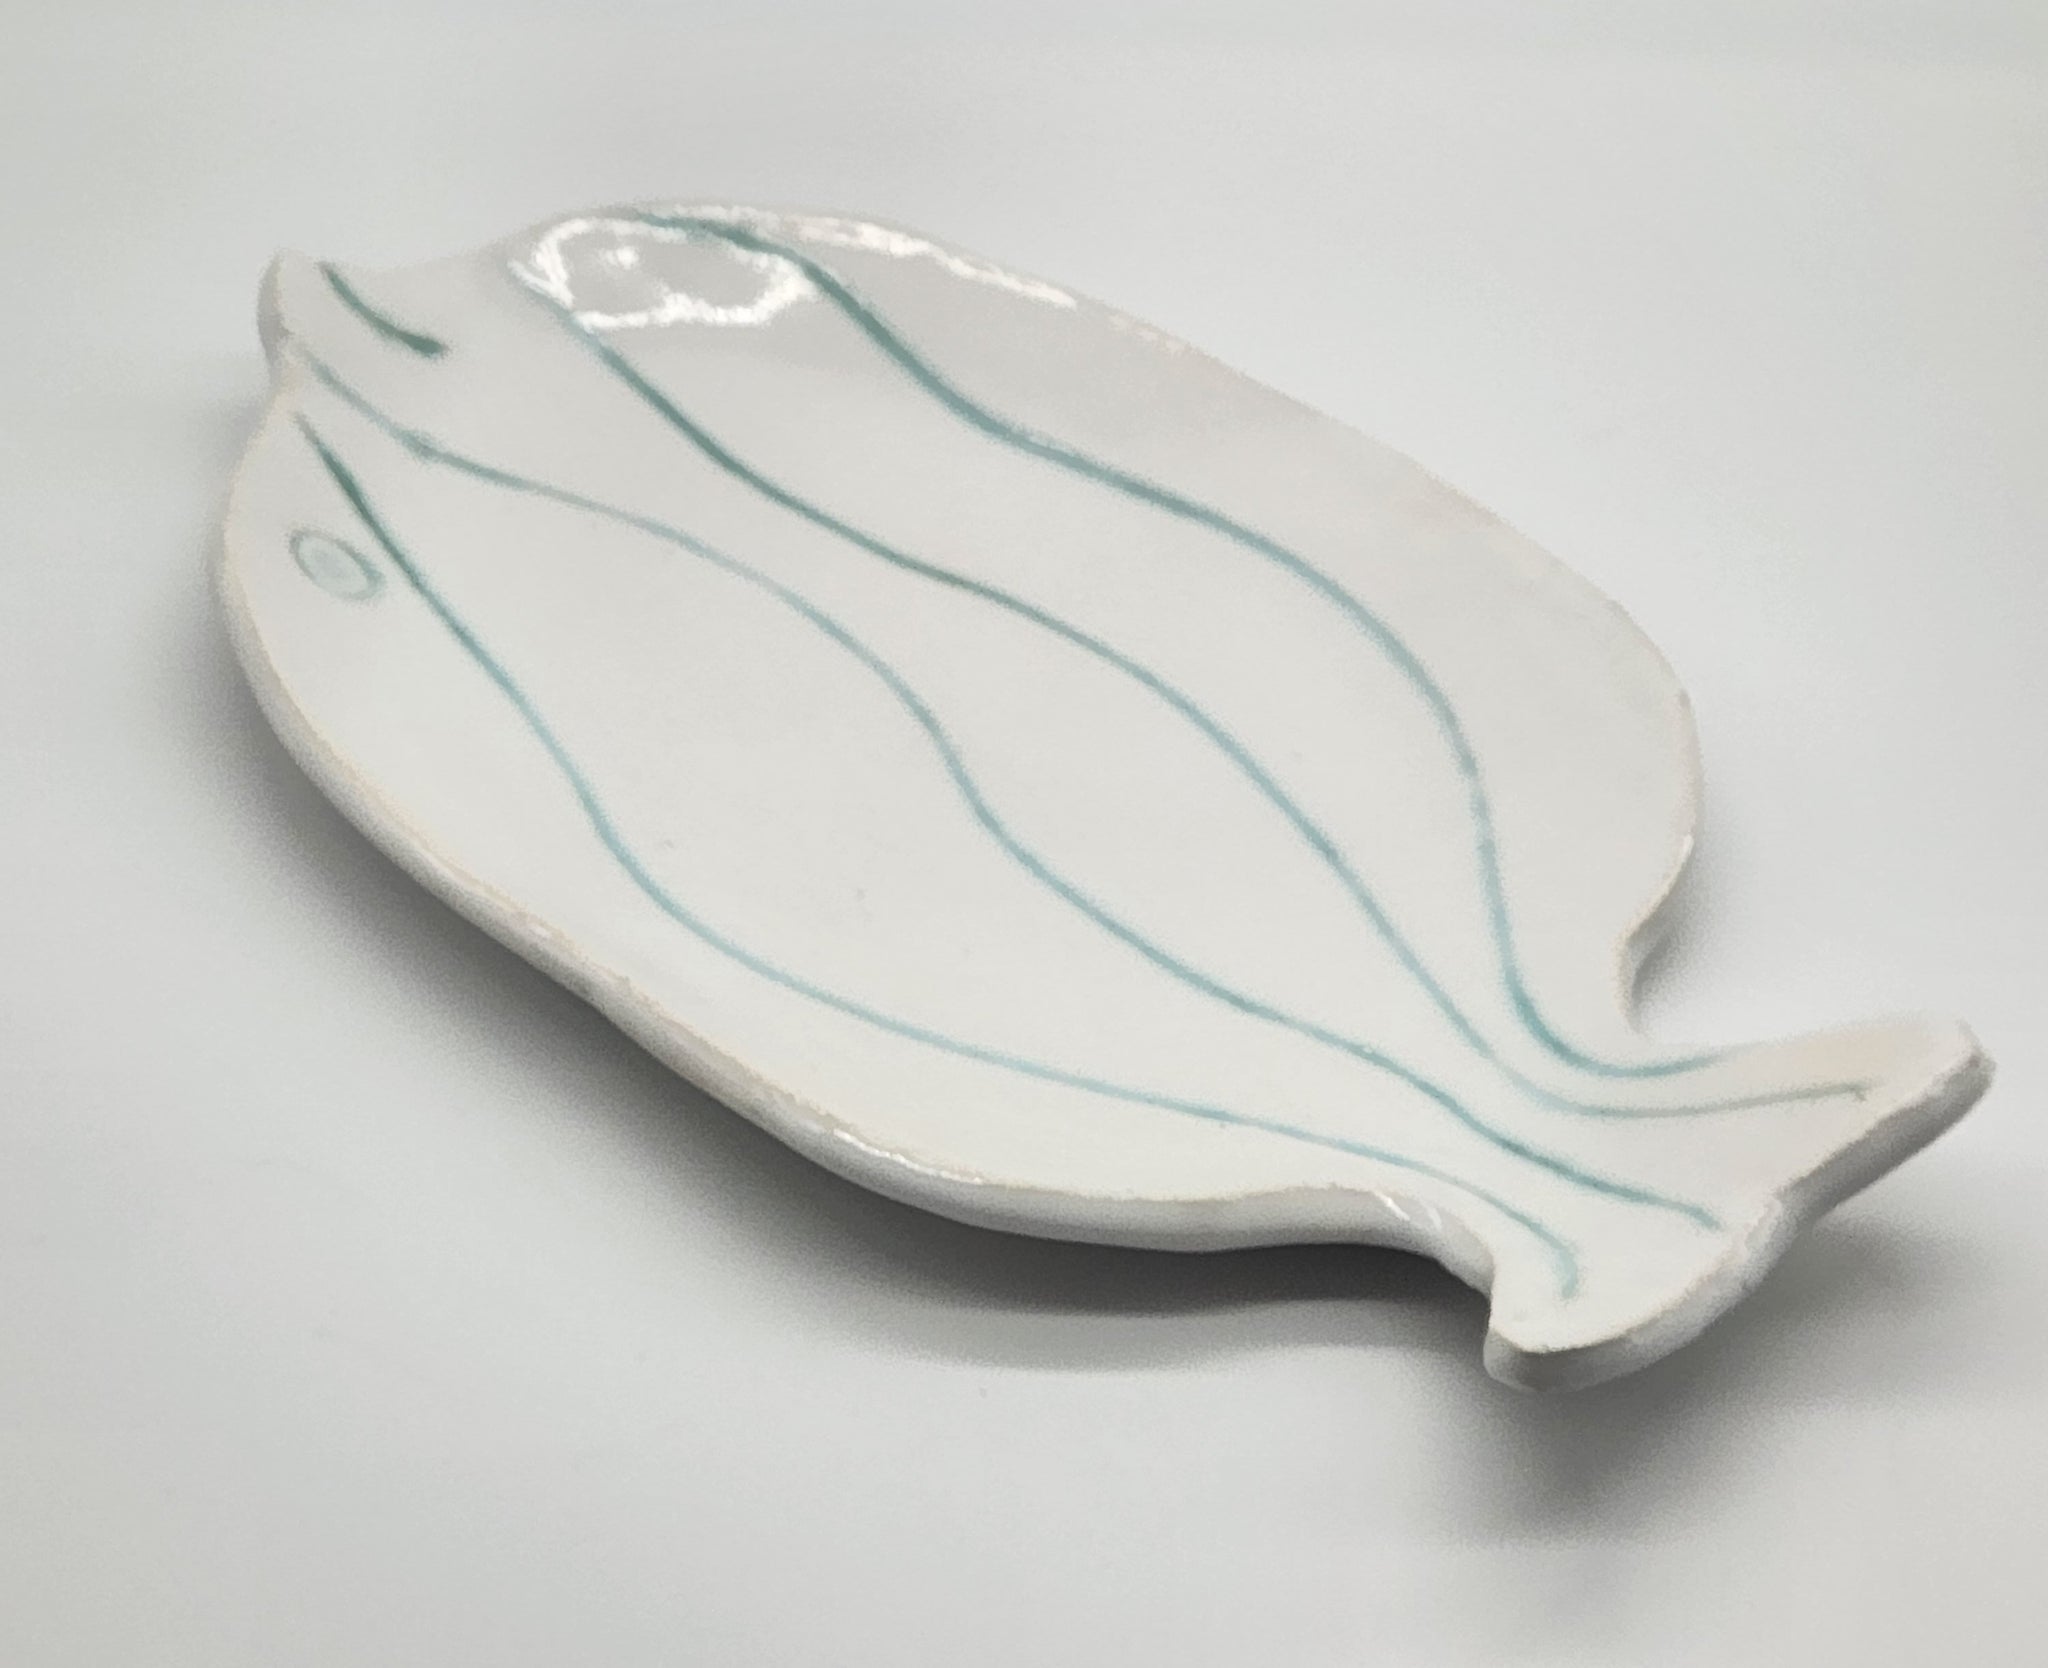 Studio Pottery Fish Tray – PF's Peculiar Finds